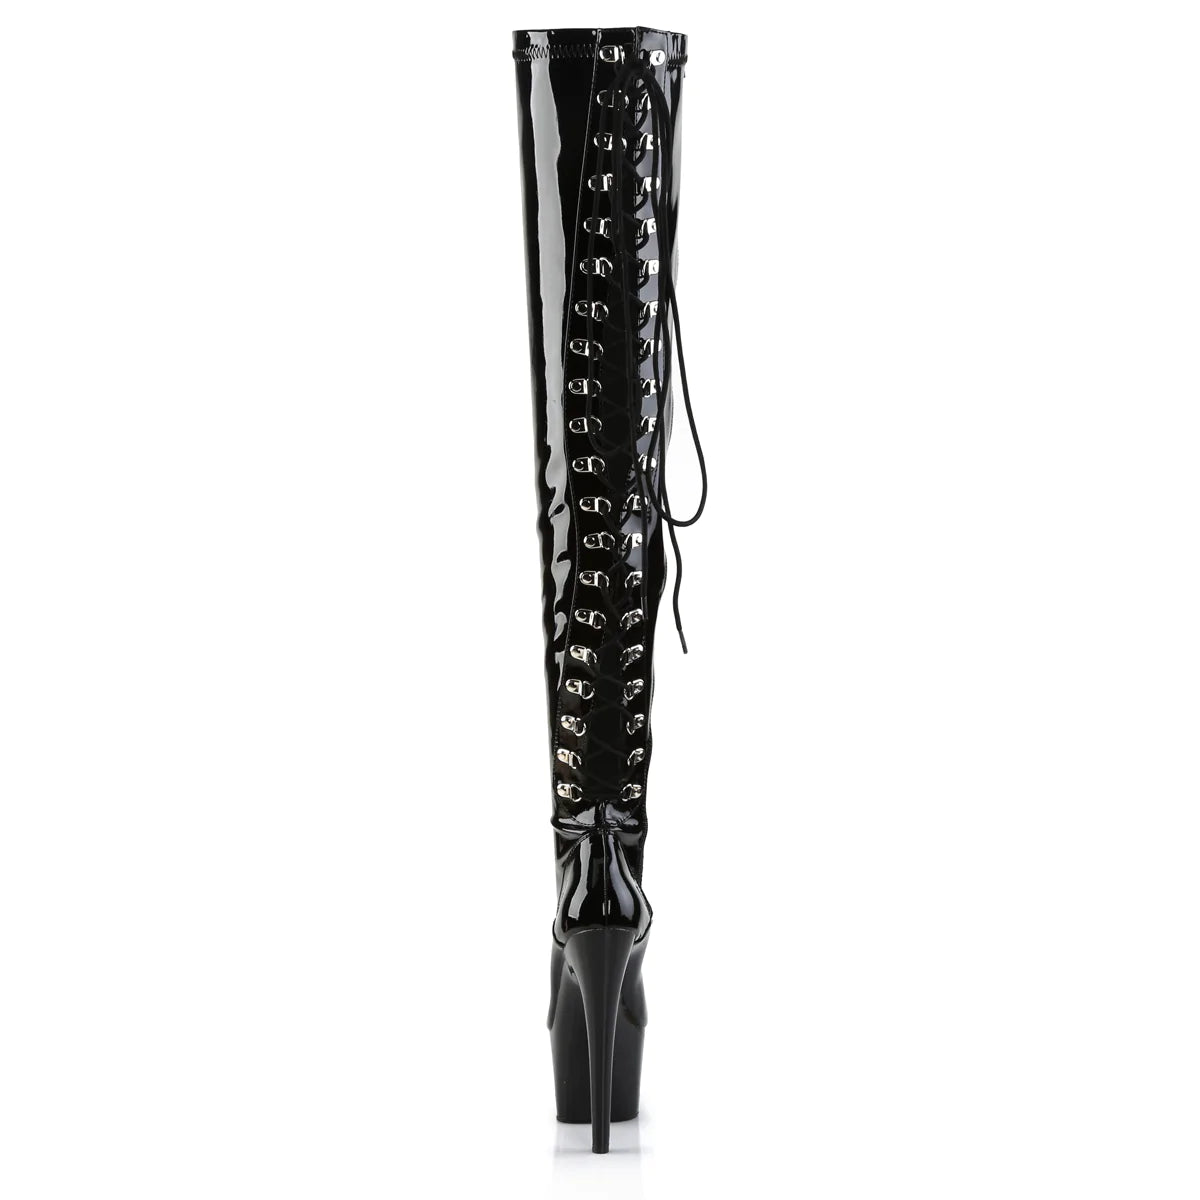 The back of the 7" Adore Thigh High Rear Lace Boot.